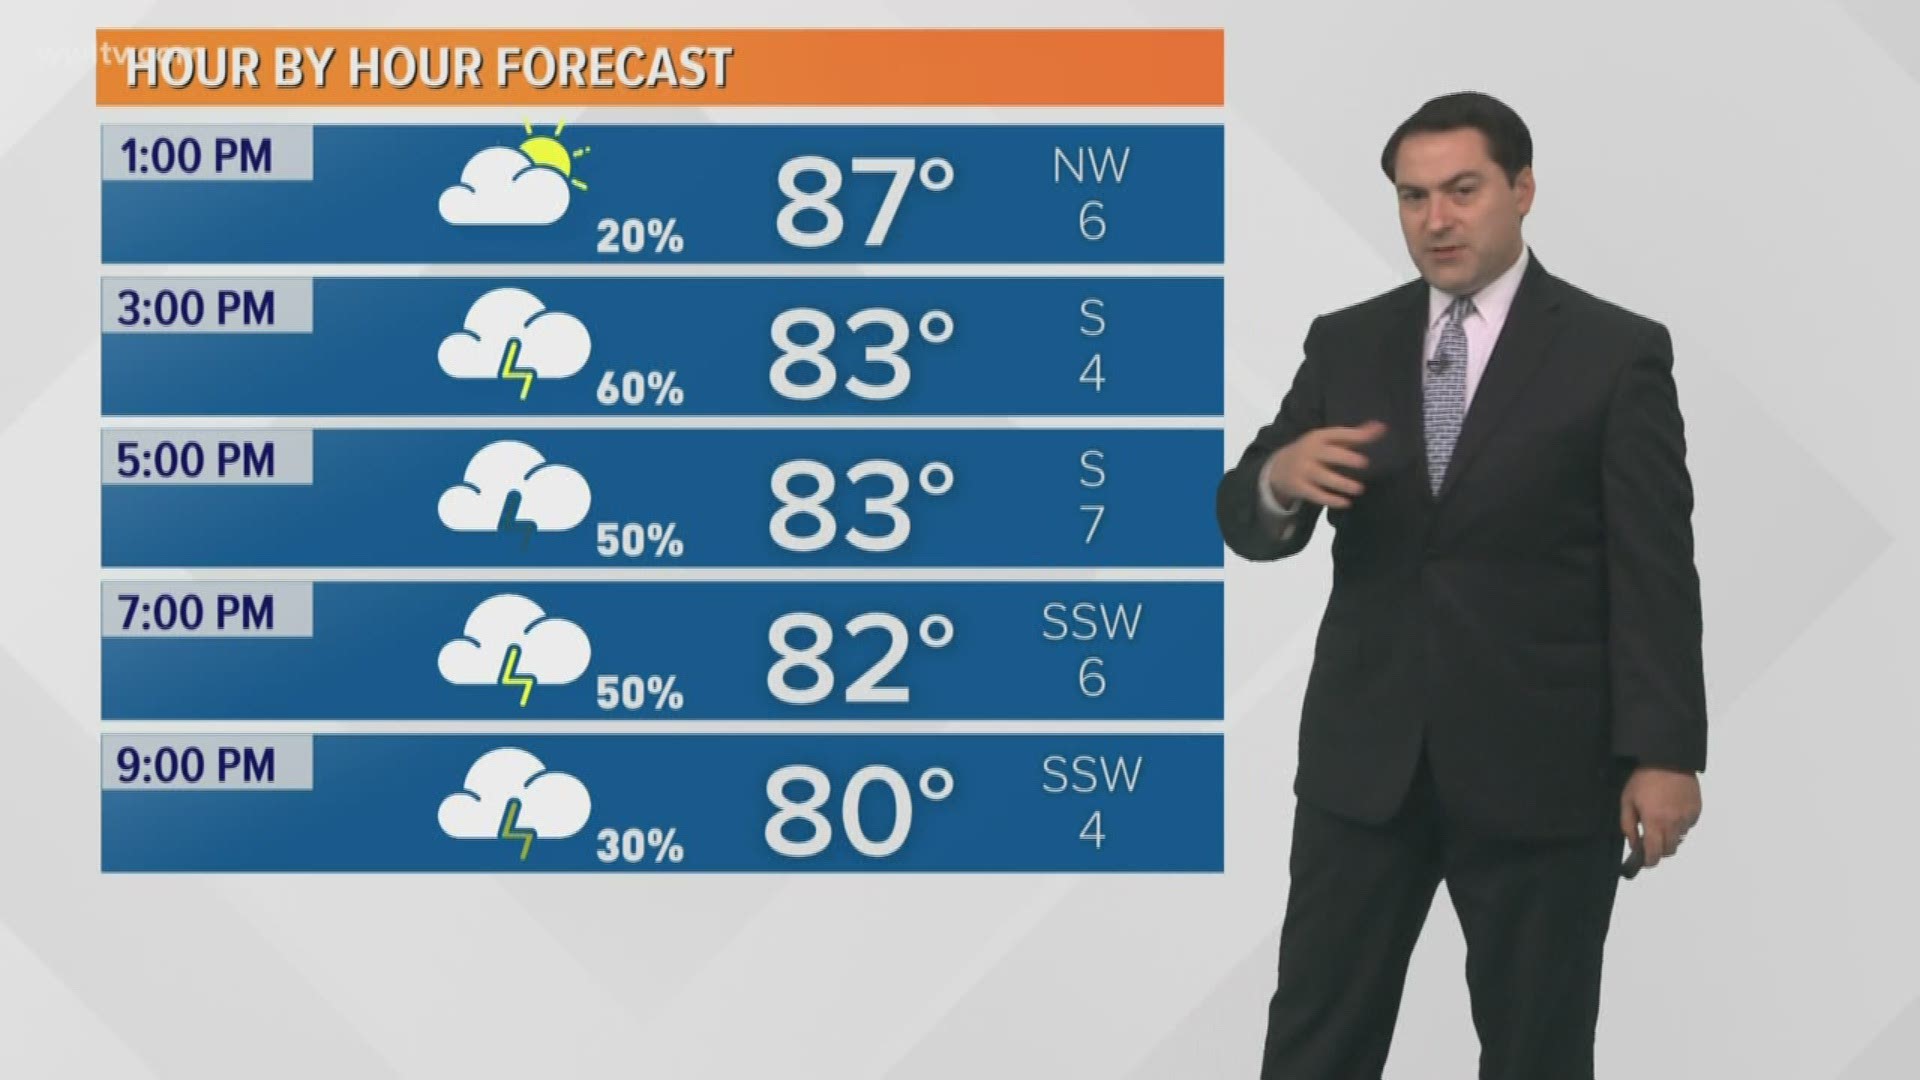 Meteorologist Dave Nussbaum says we will have another round of scattered storms with some heavy rain. Plus, he takes a look at the tropics and a wave that could impact us by the weekend.